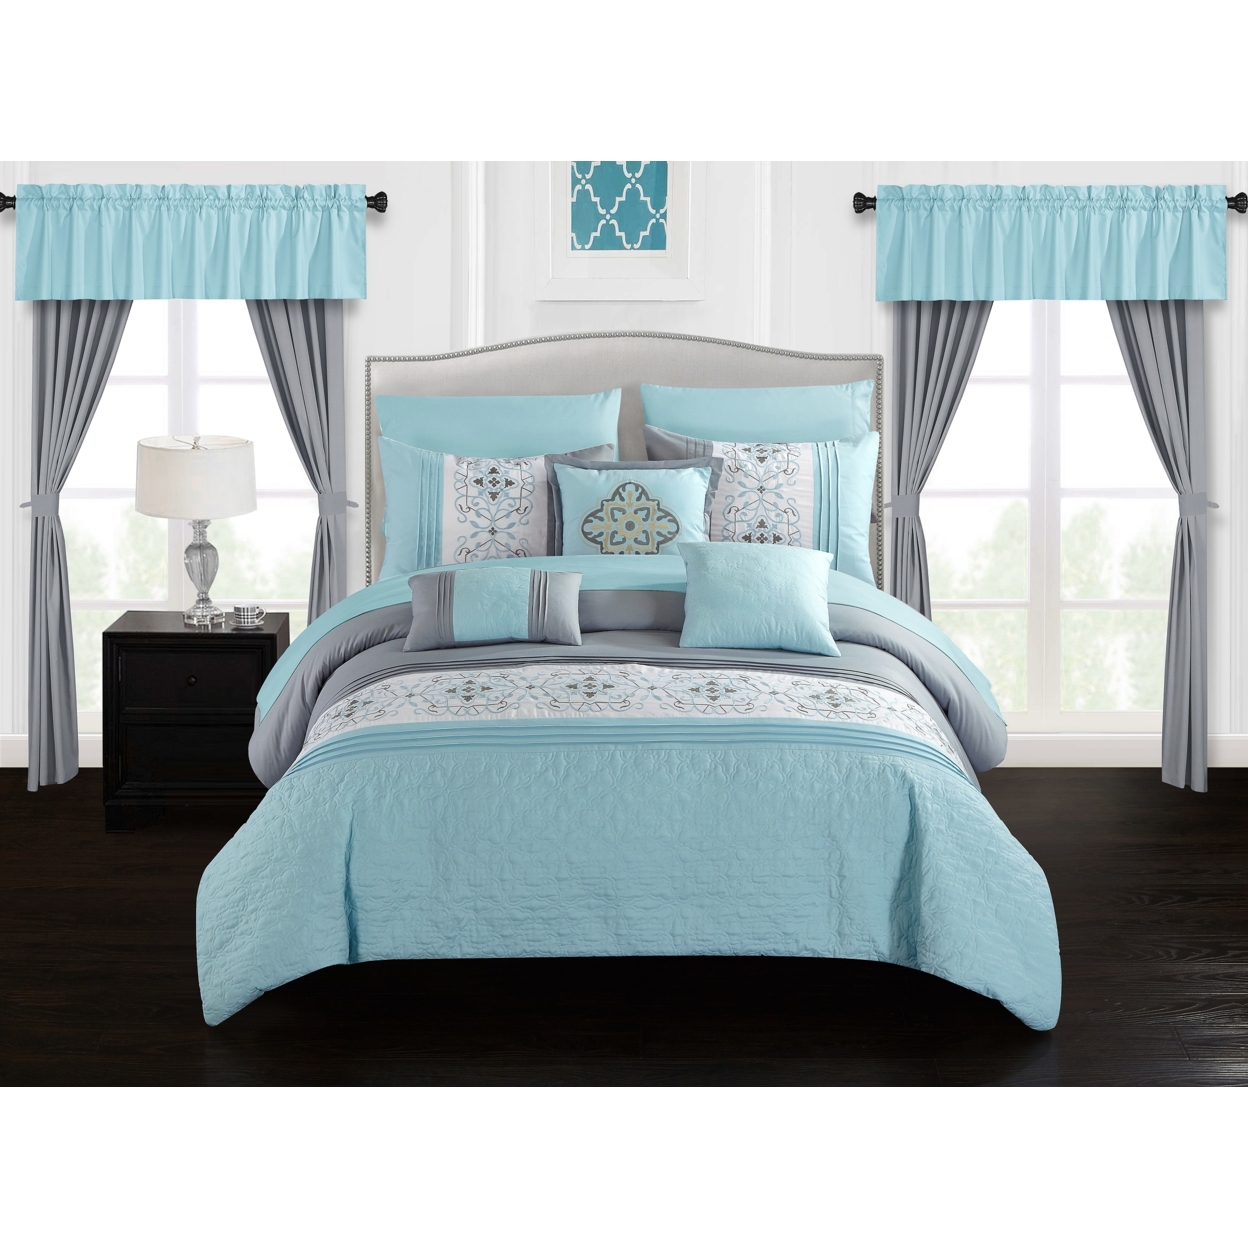 Jurgen 20-Piece Floral Embroidered Bed In A Bag Bedding And Comforter Set - Aqua Blue, Queen